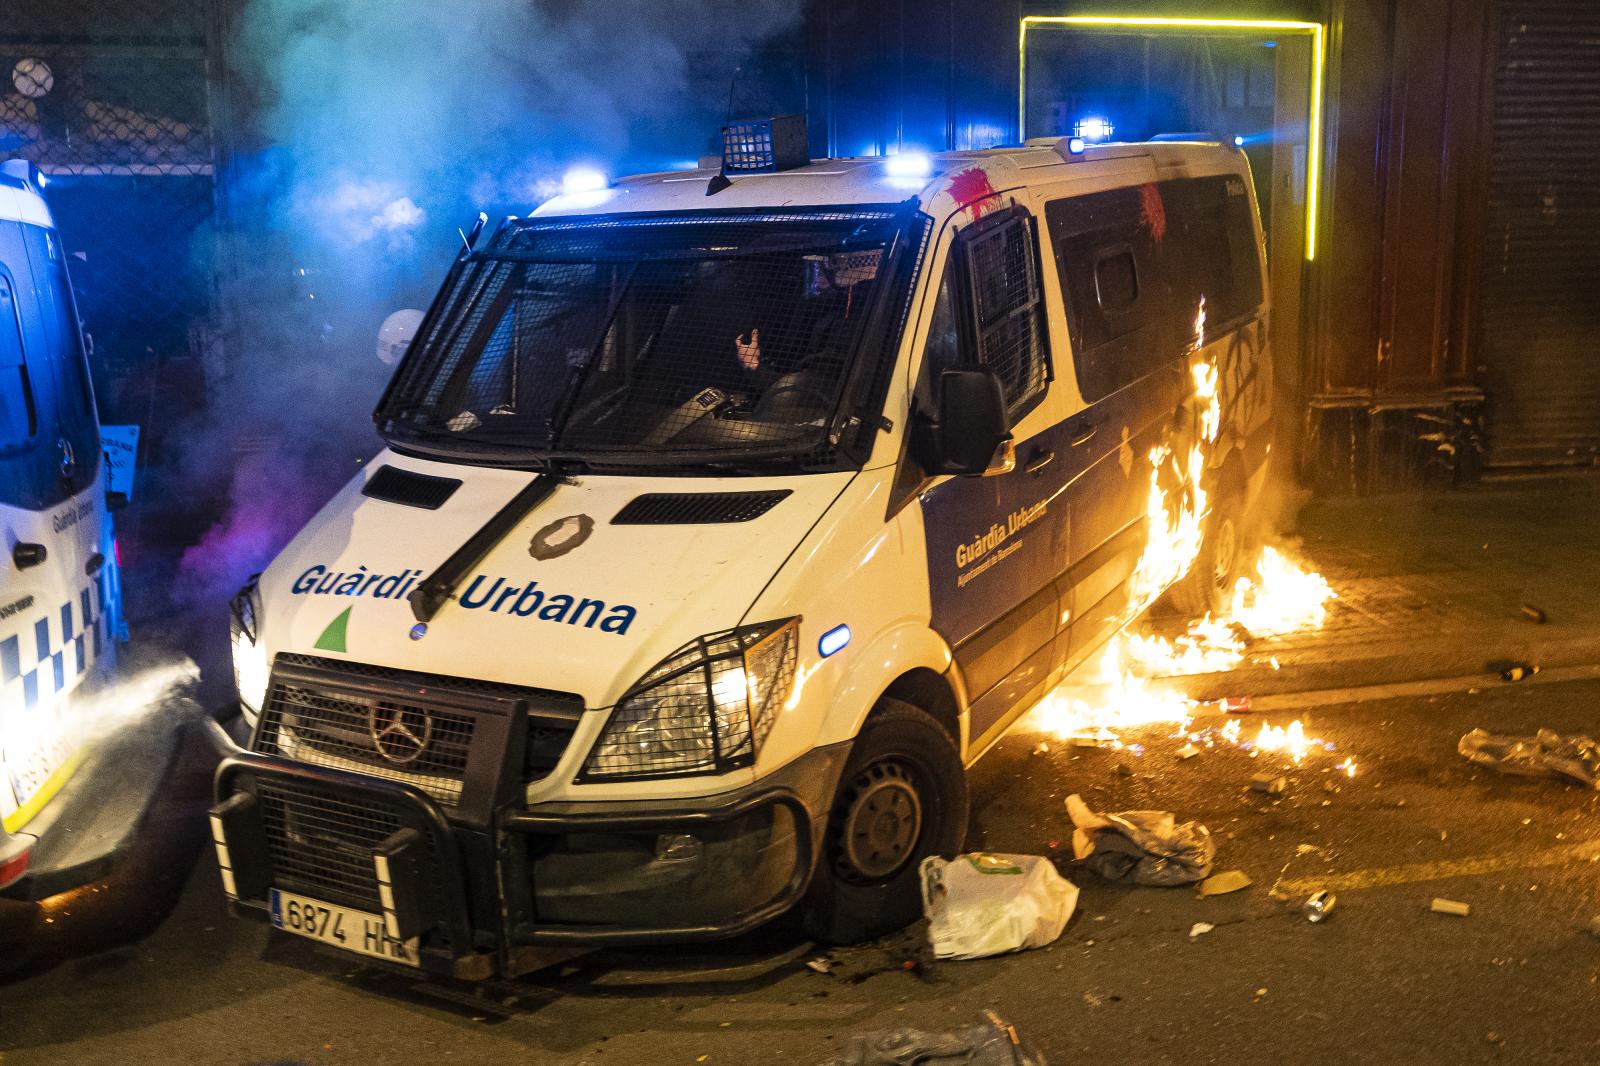 Image from DAILY NEWS - A van of the riot unit BRIMO of the Mossos de Esquadra is...